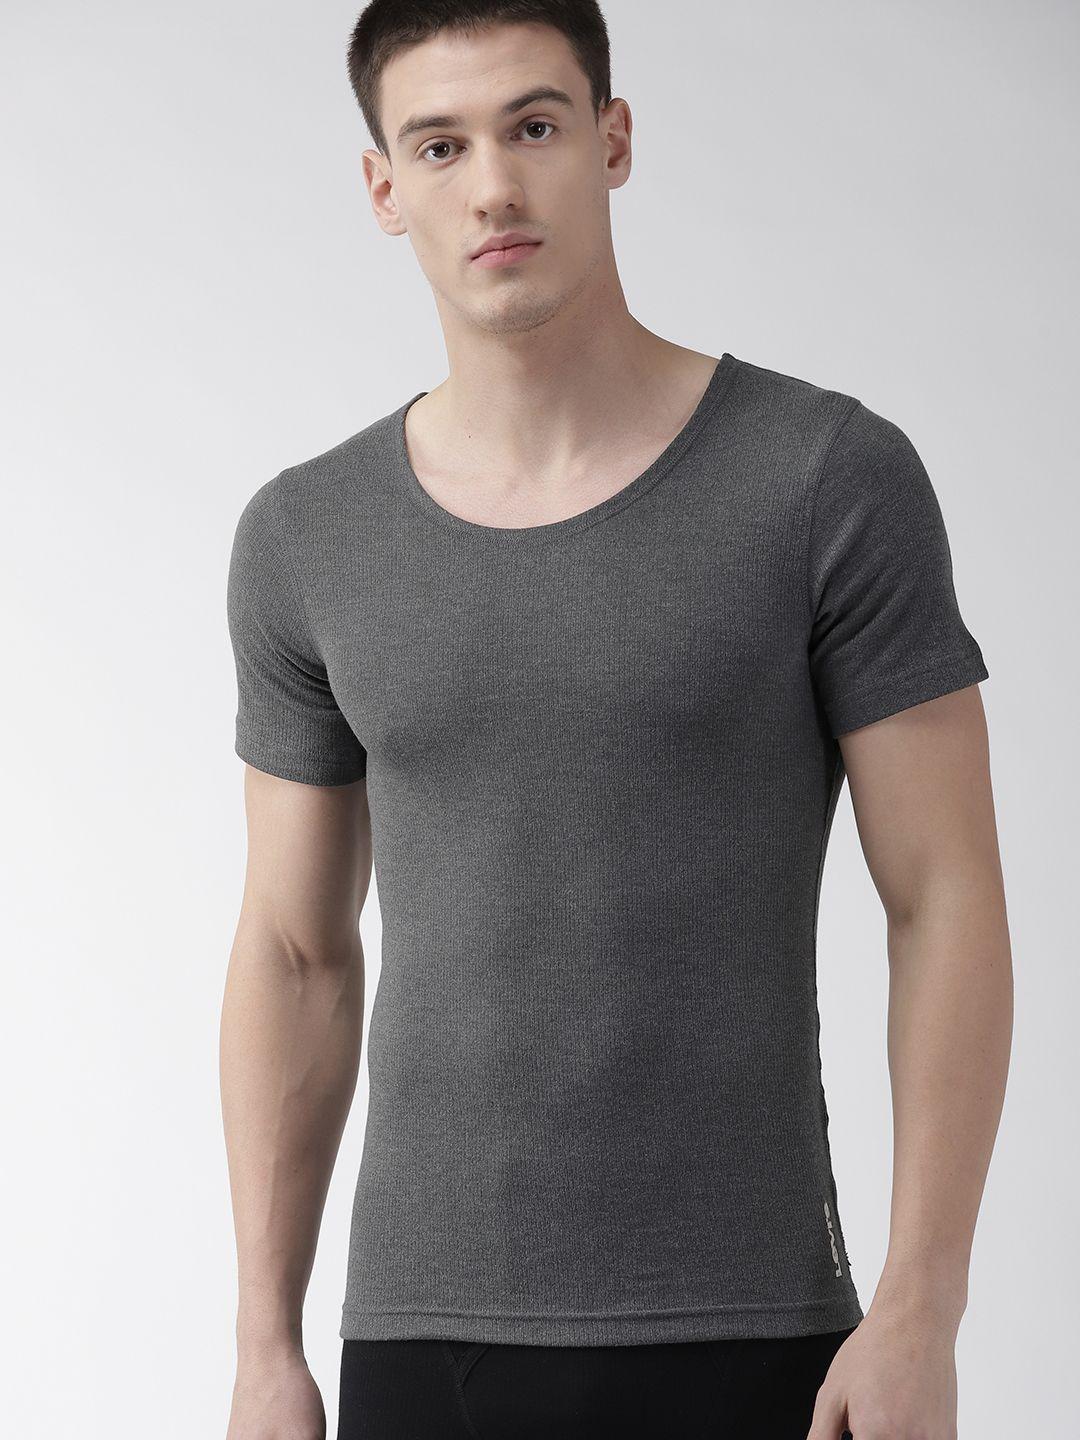 levis men charcoal grey solid thermal top